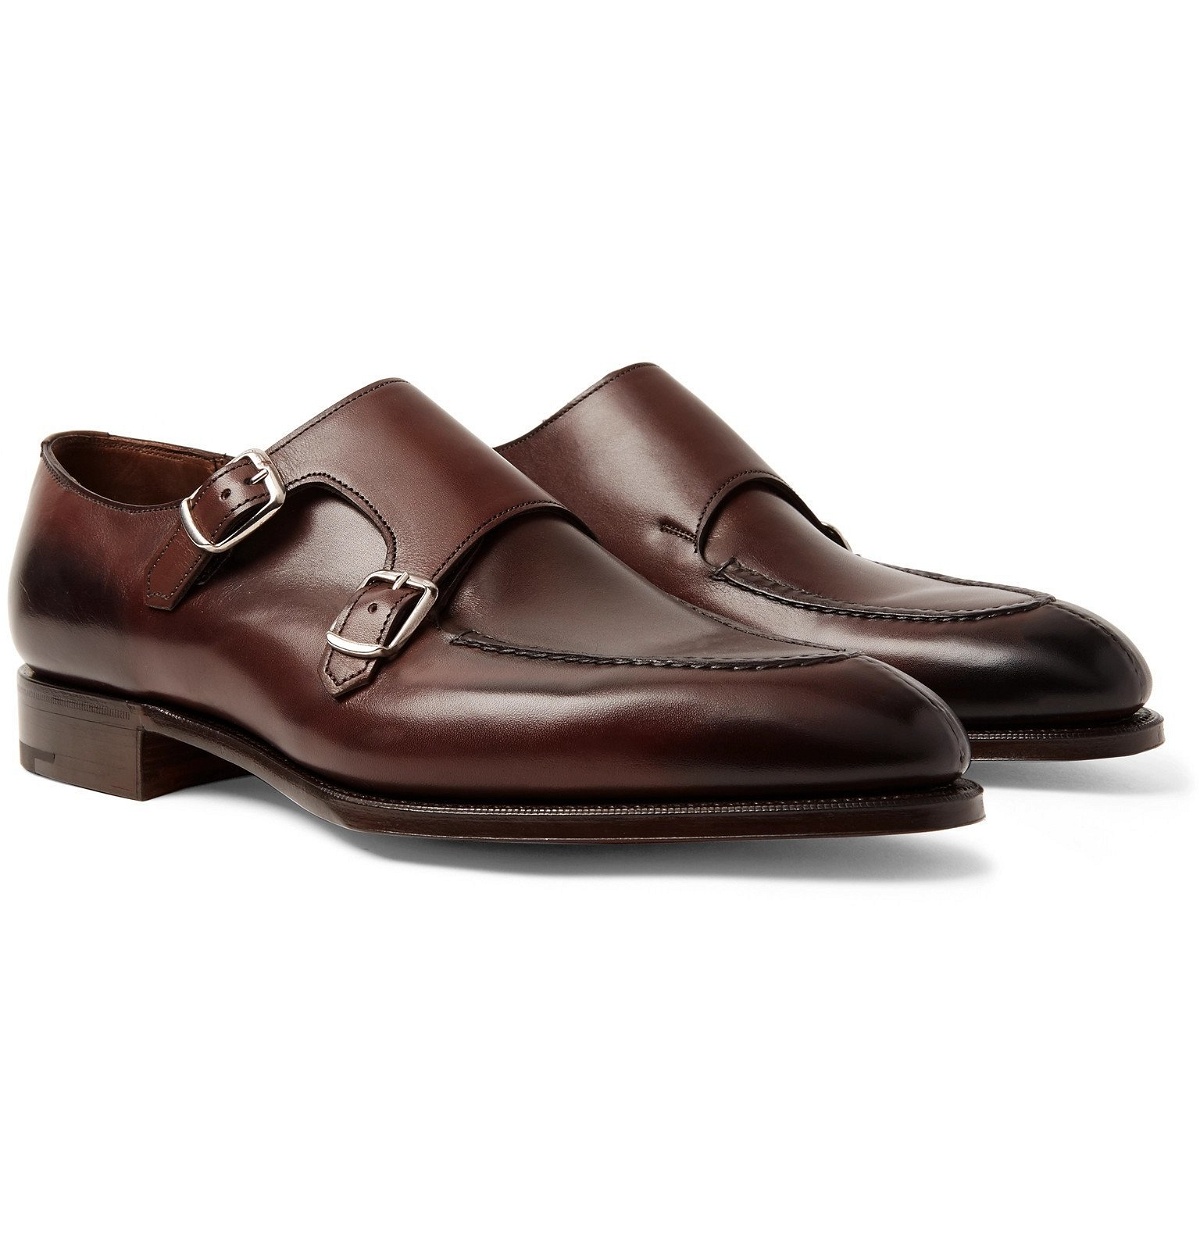 Edward Green - Fulham Suede Monk-Strap Shoes - Brown Edward Green